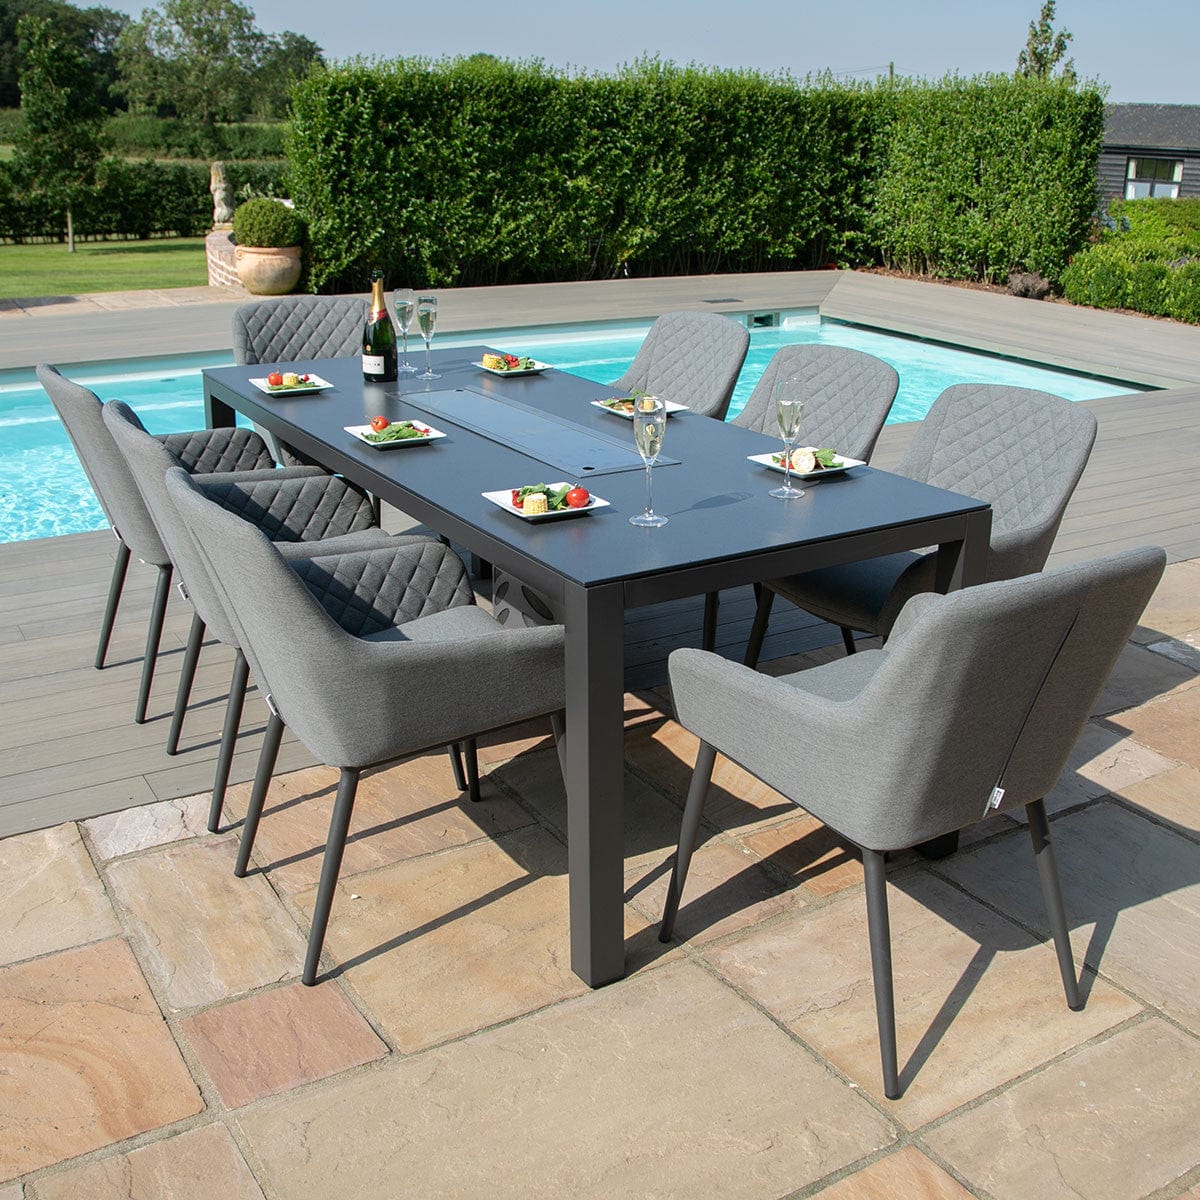 Maze Outdoors Zest 8 Seat Rectangular Dining Set with Fire Pit Table / Flanelle House of Isabella UK